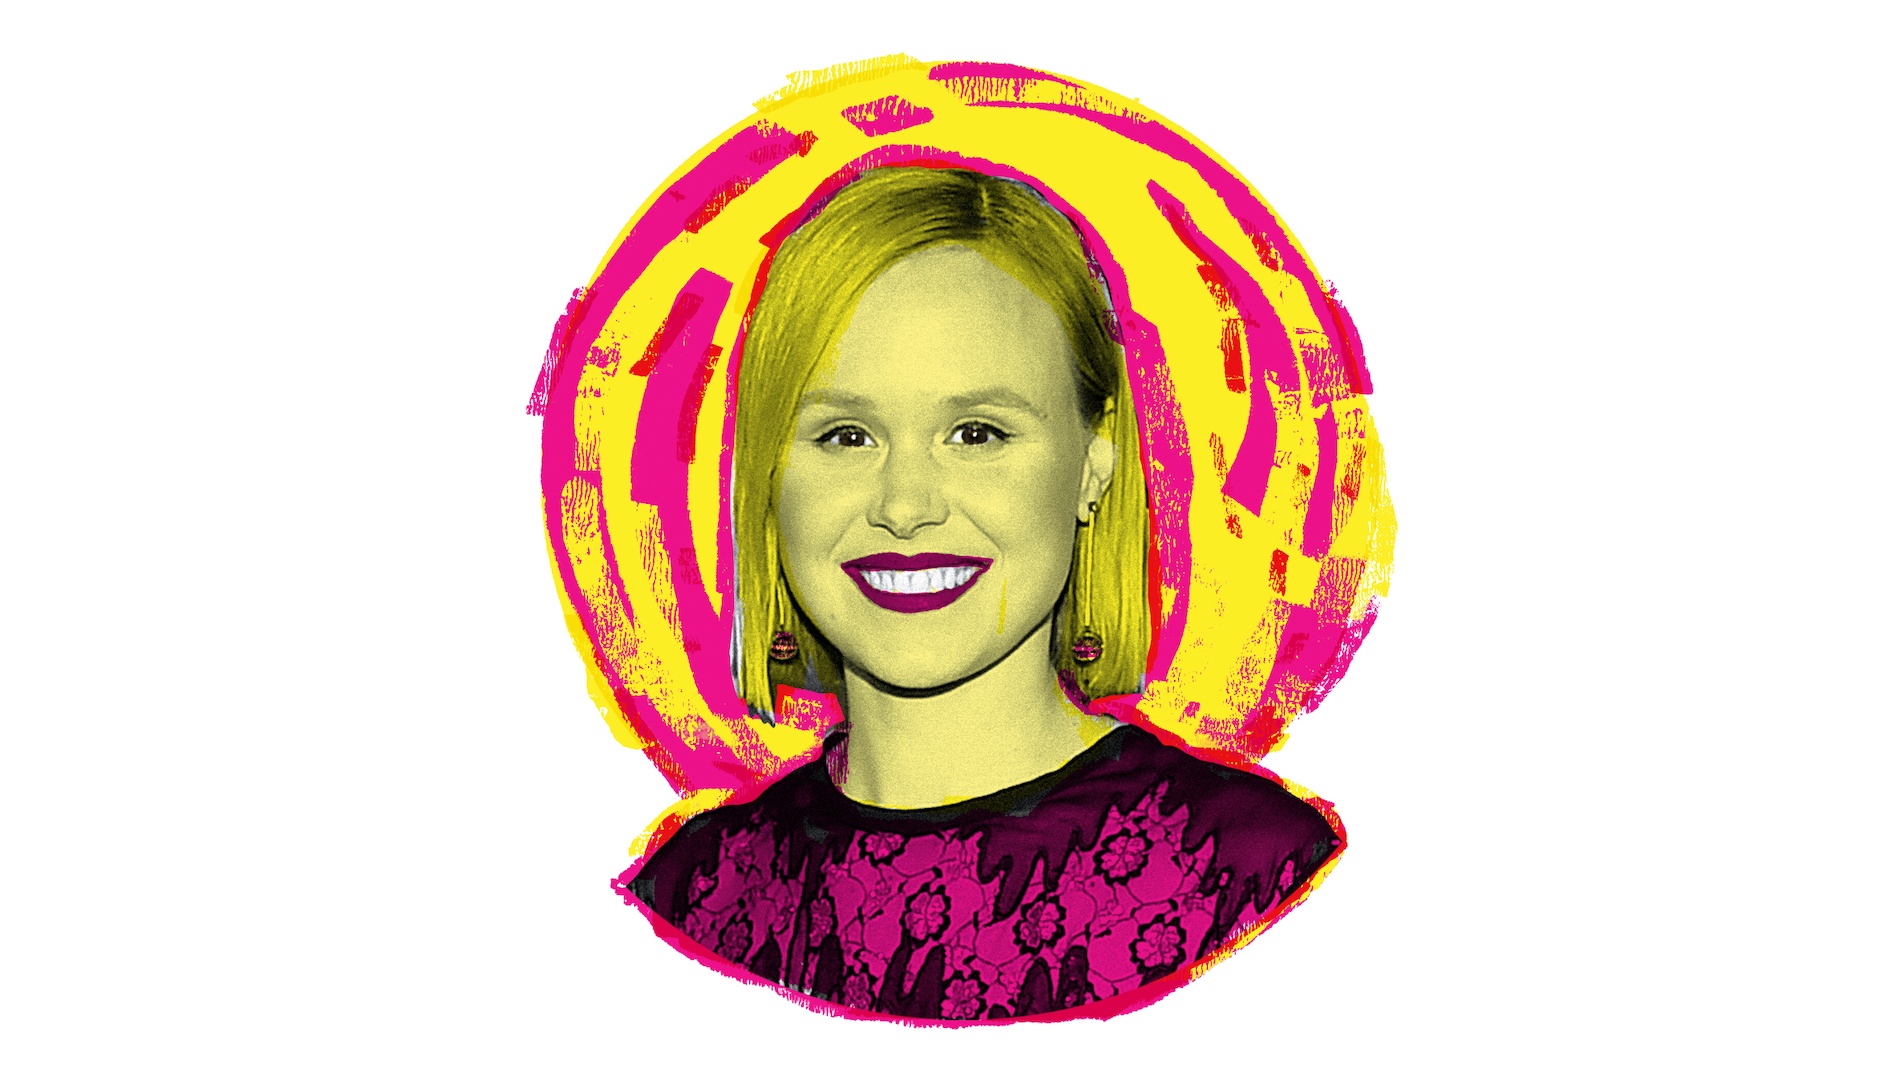 Alison Pill on the Unlikely Timeliness of ‘Star Trek: Picard’ + How She First Fell in Love With Acting